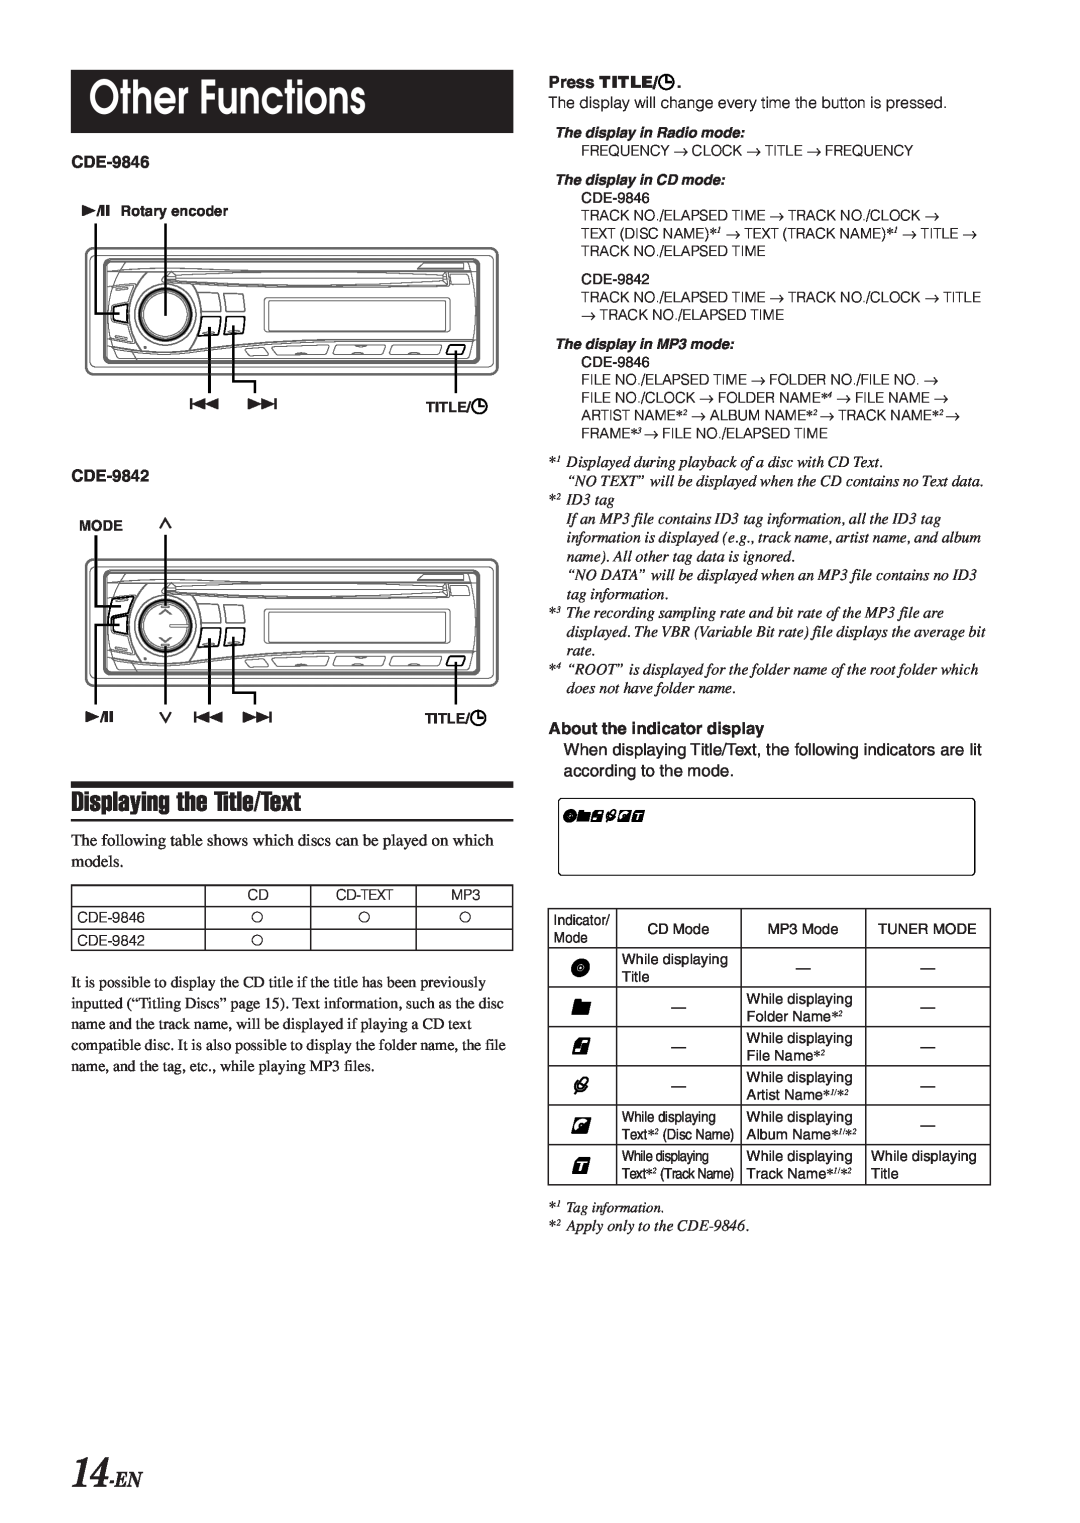 Alpine CDE-9842 owner manual Other Functions, Displaying the Title/Text, 14-EN 